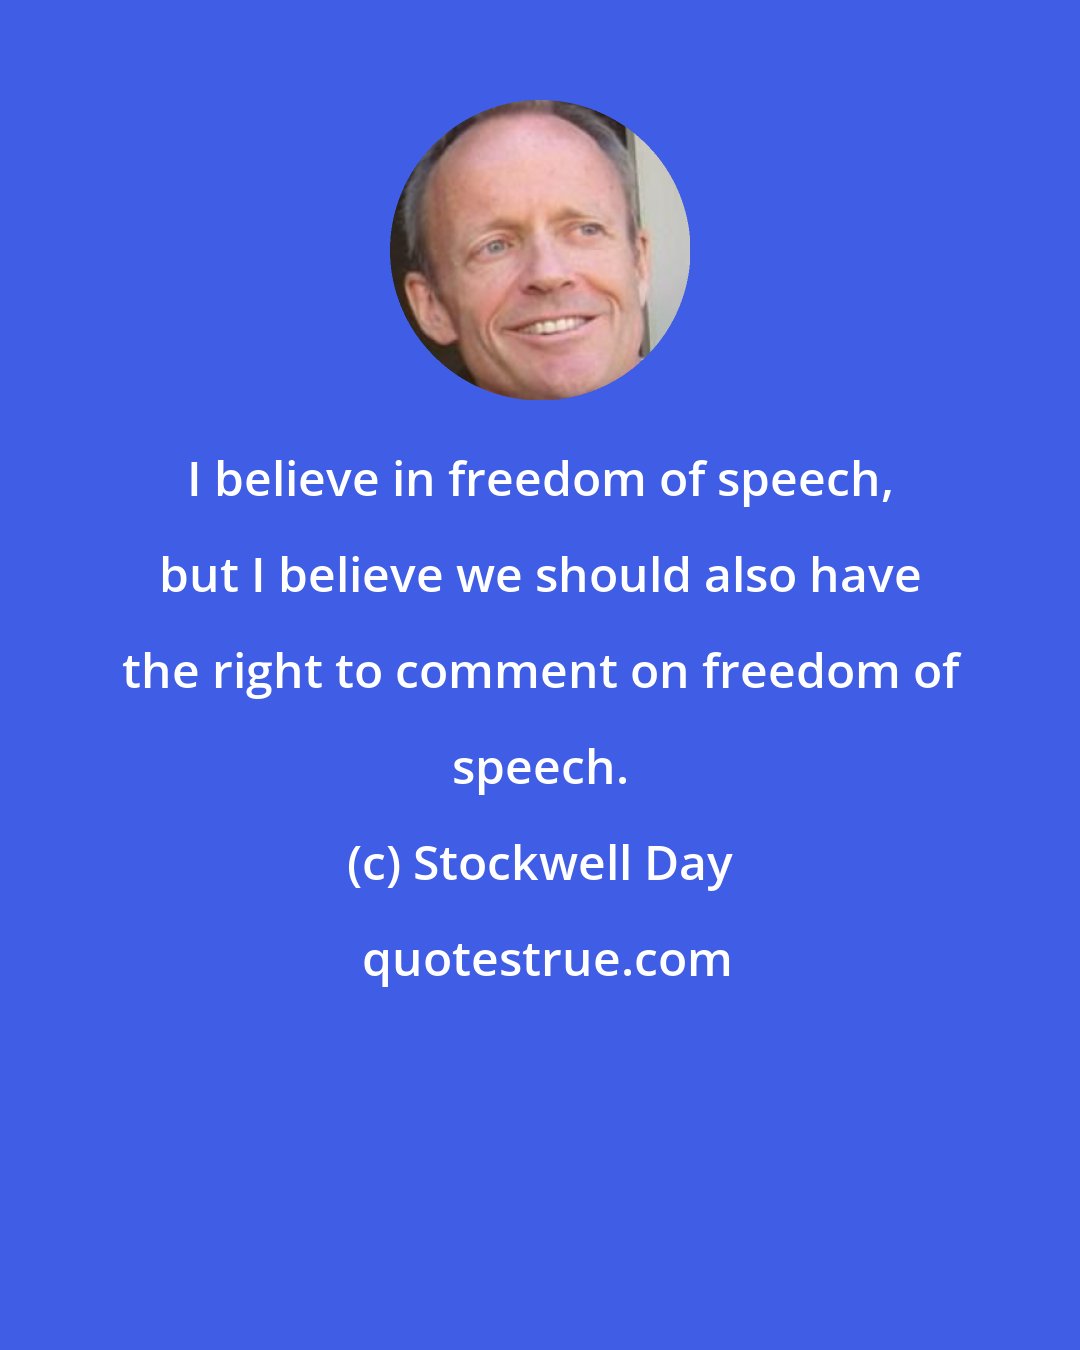 Stockwell Day: I believe in freedom of speech, but I believe we should also have the right to comment on freedom of speech.